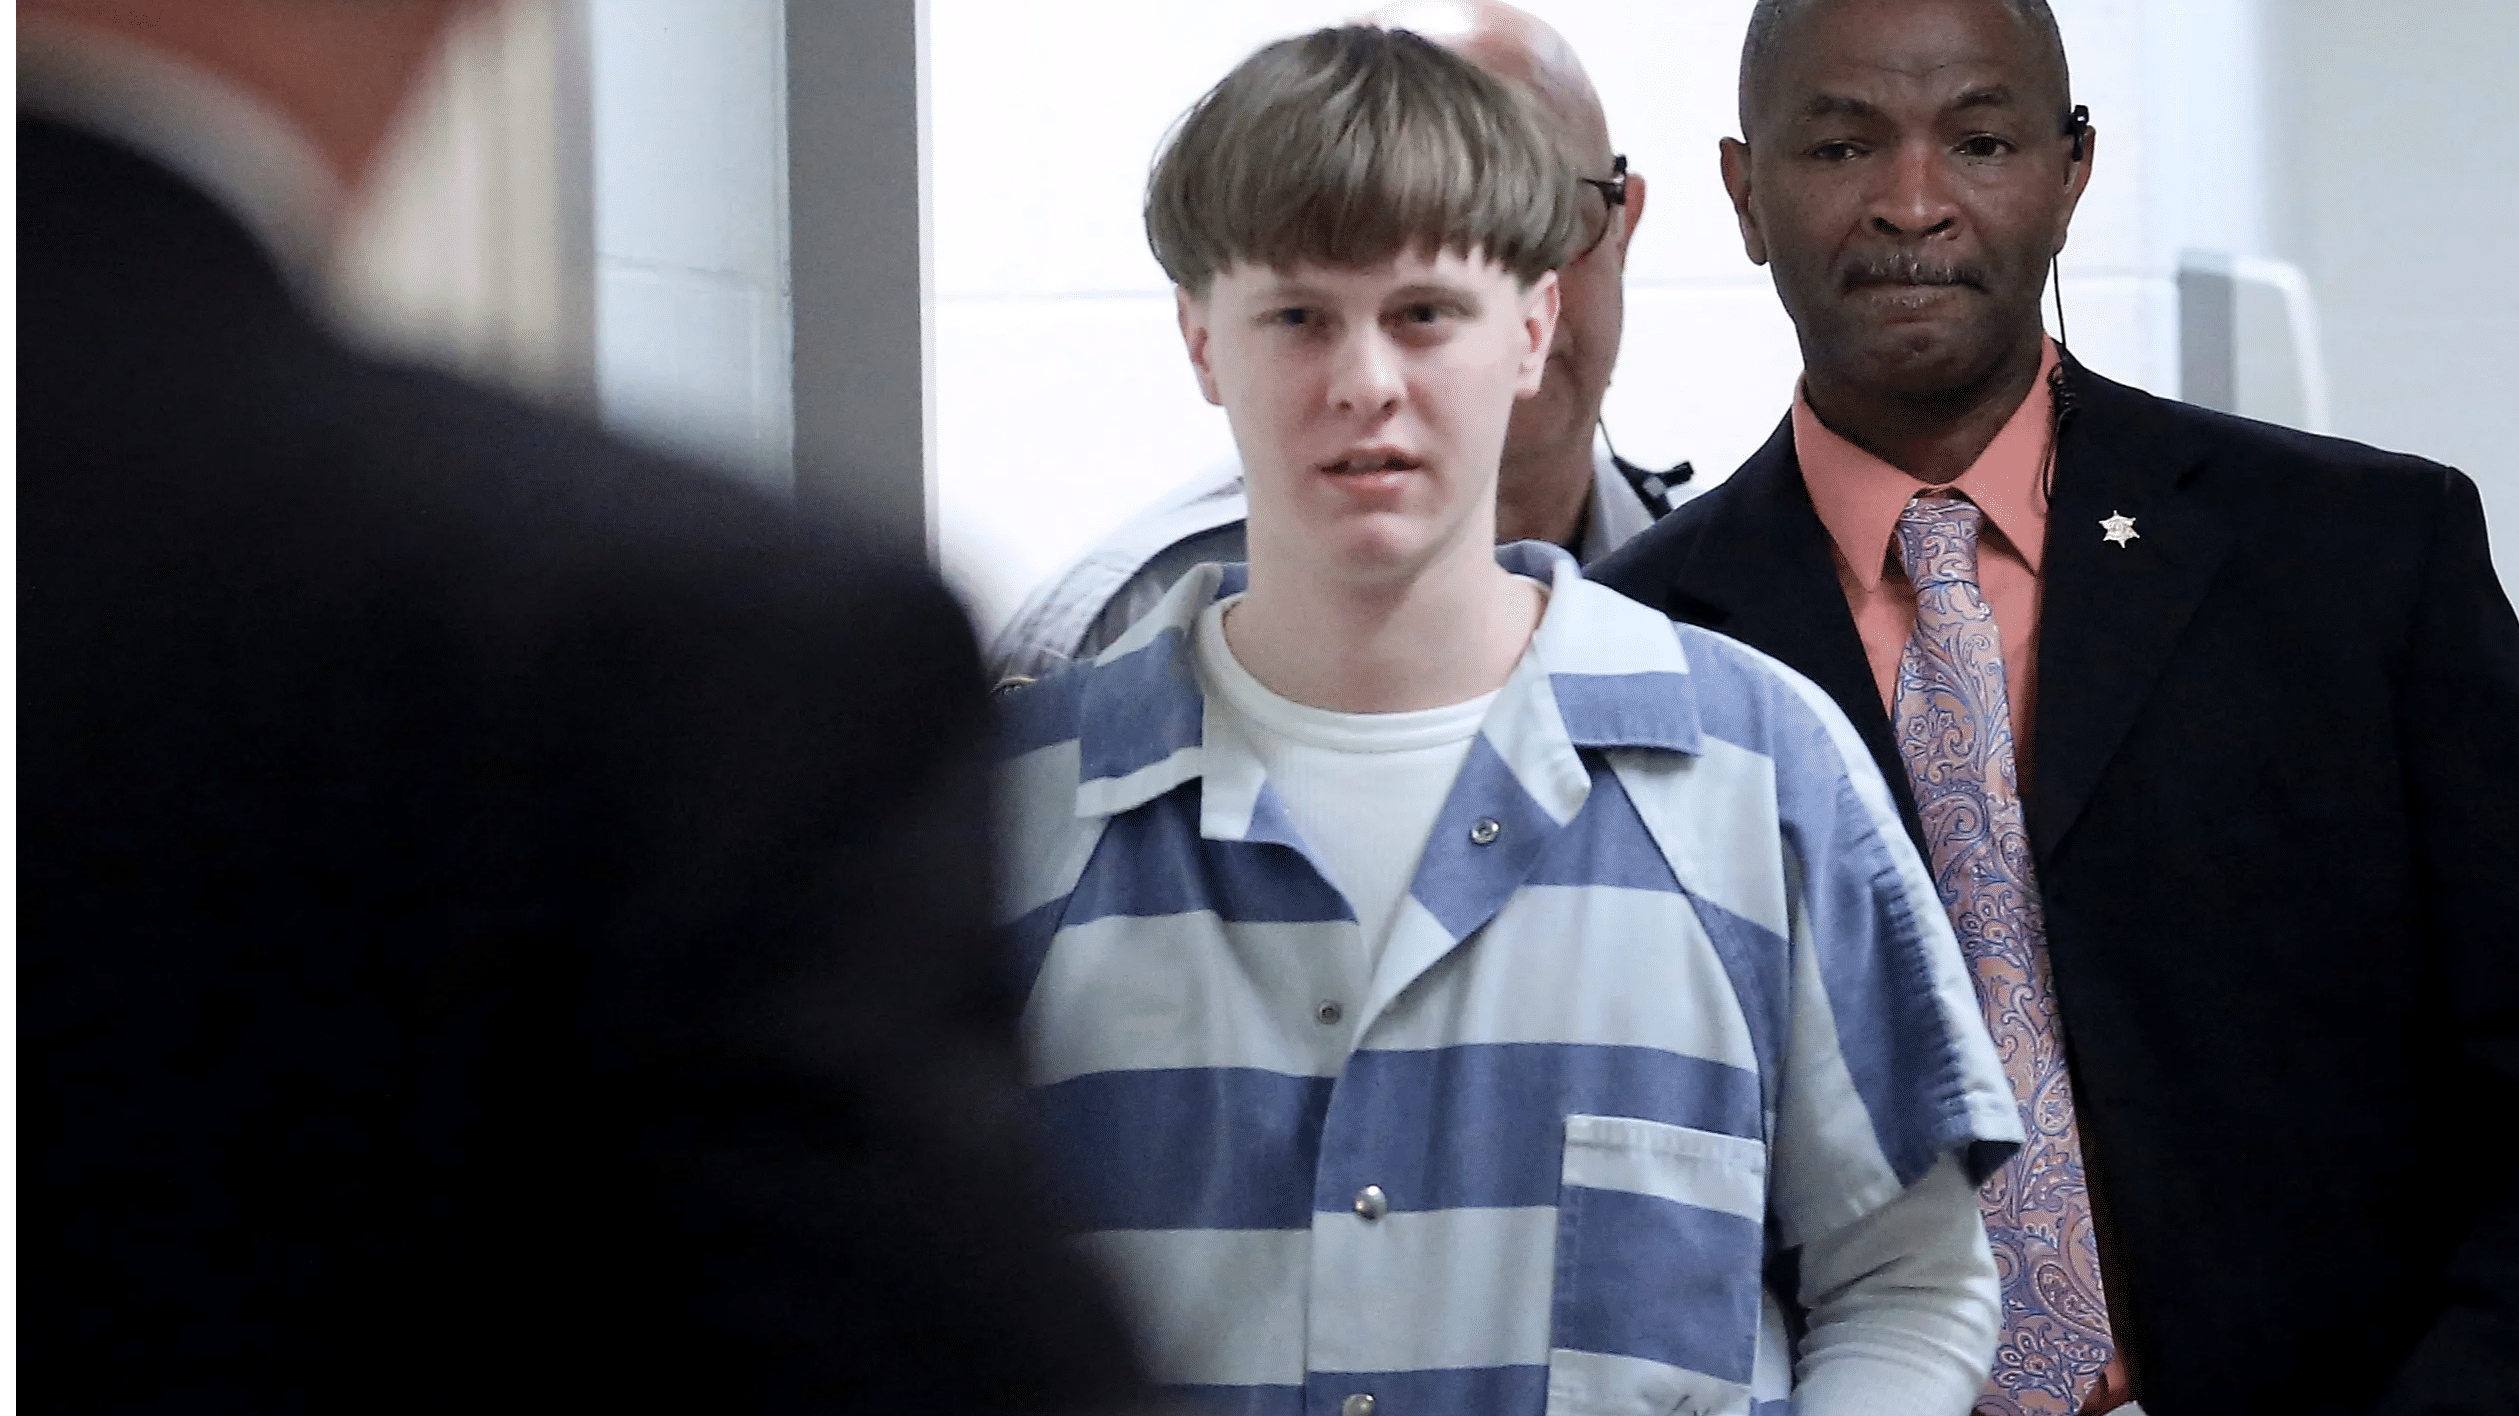 Mass shooting convict Dylann Roof’s death sentence upheld by US court